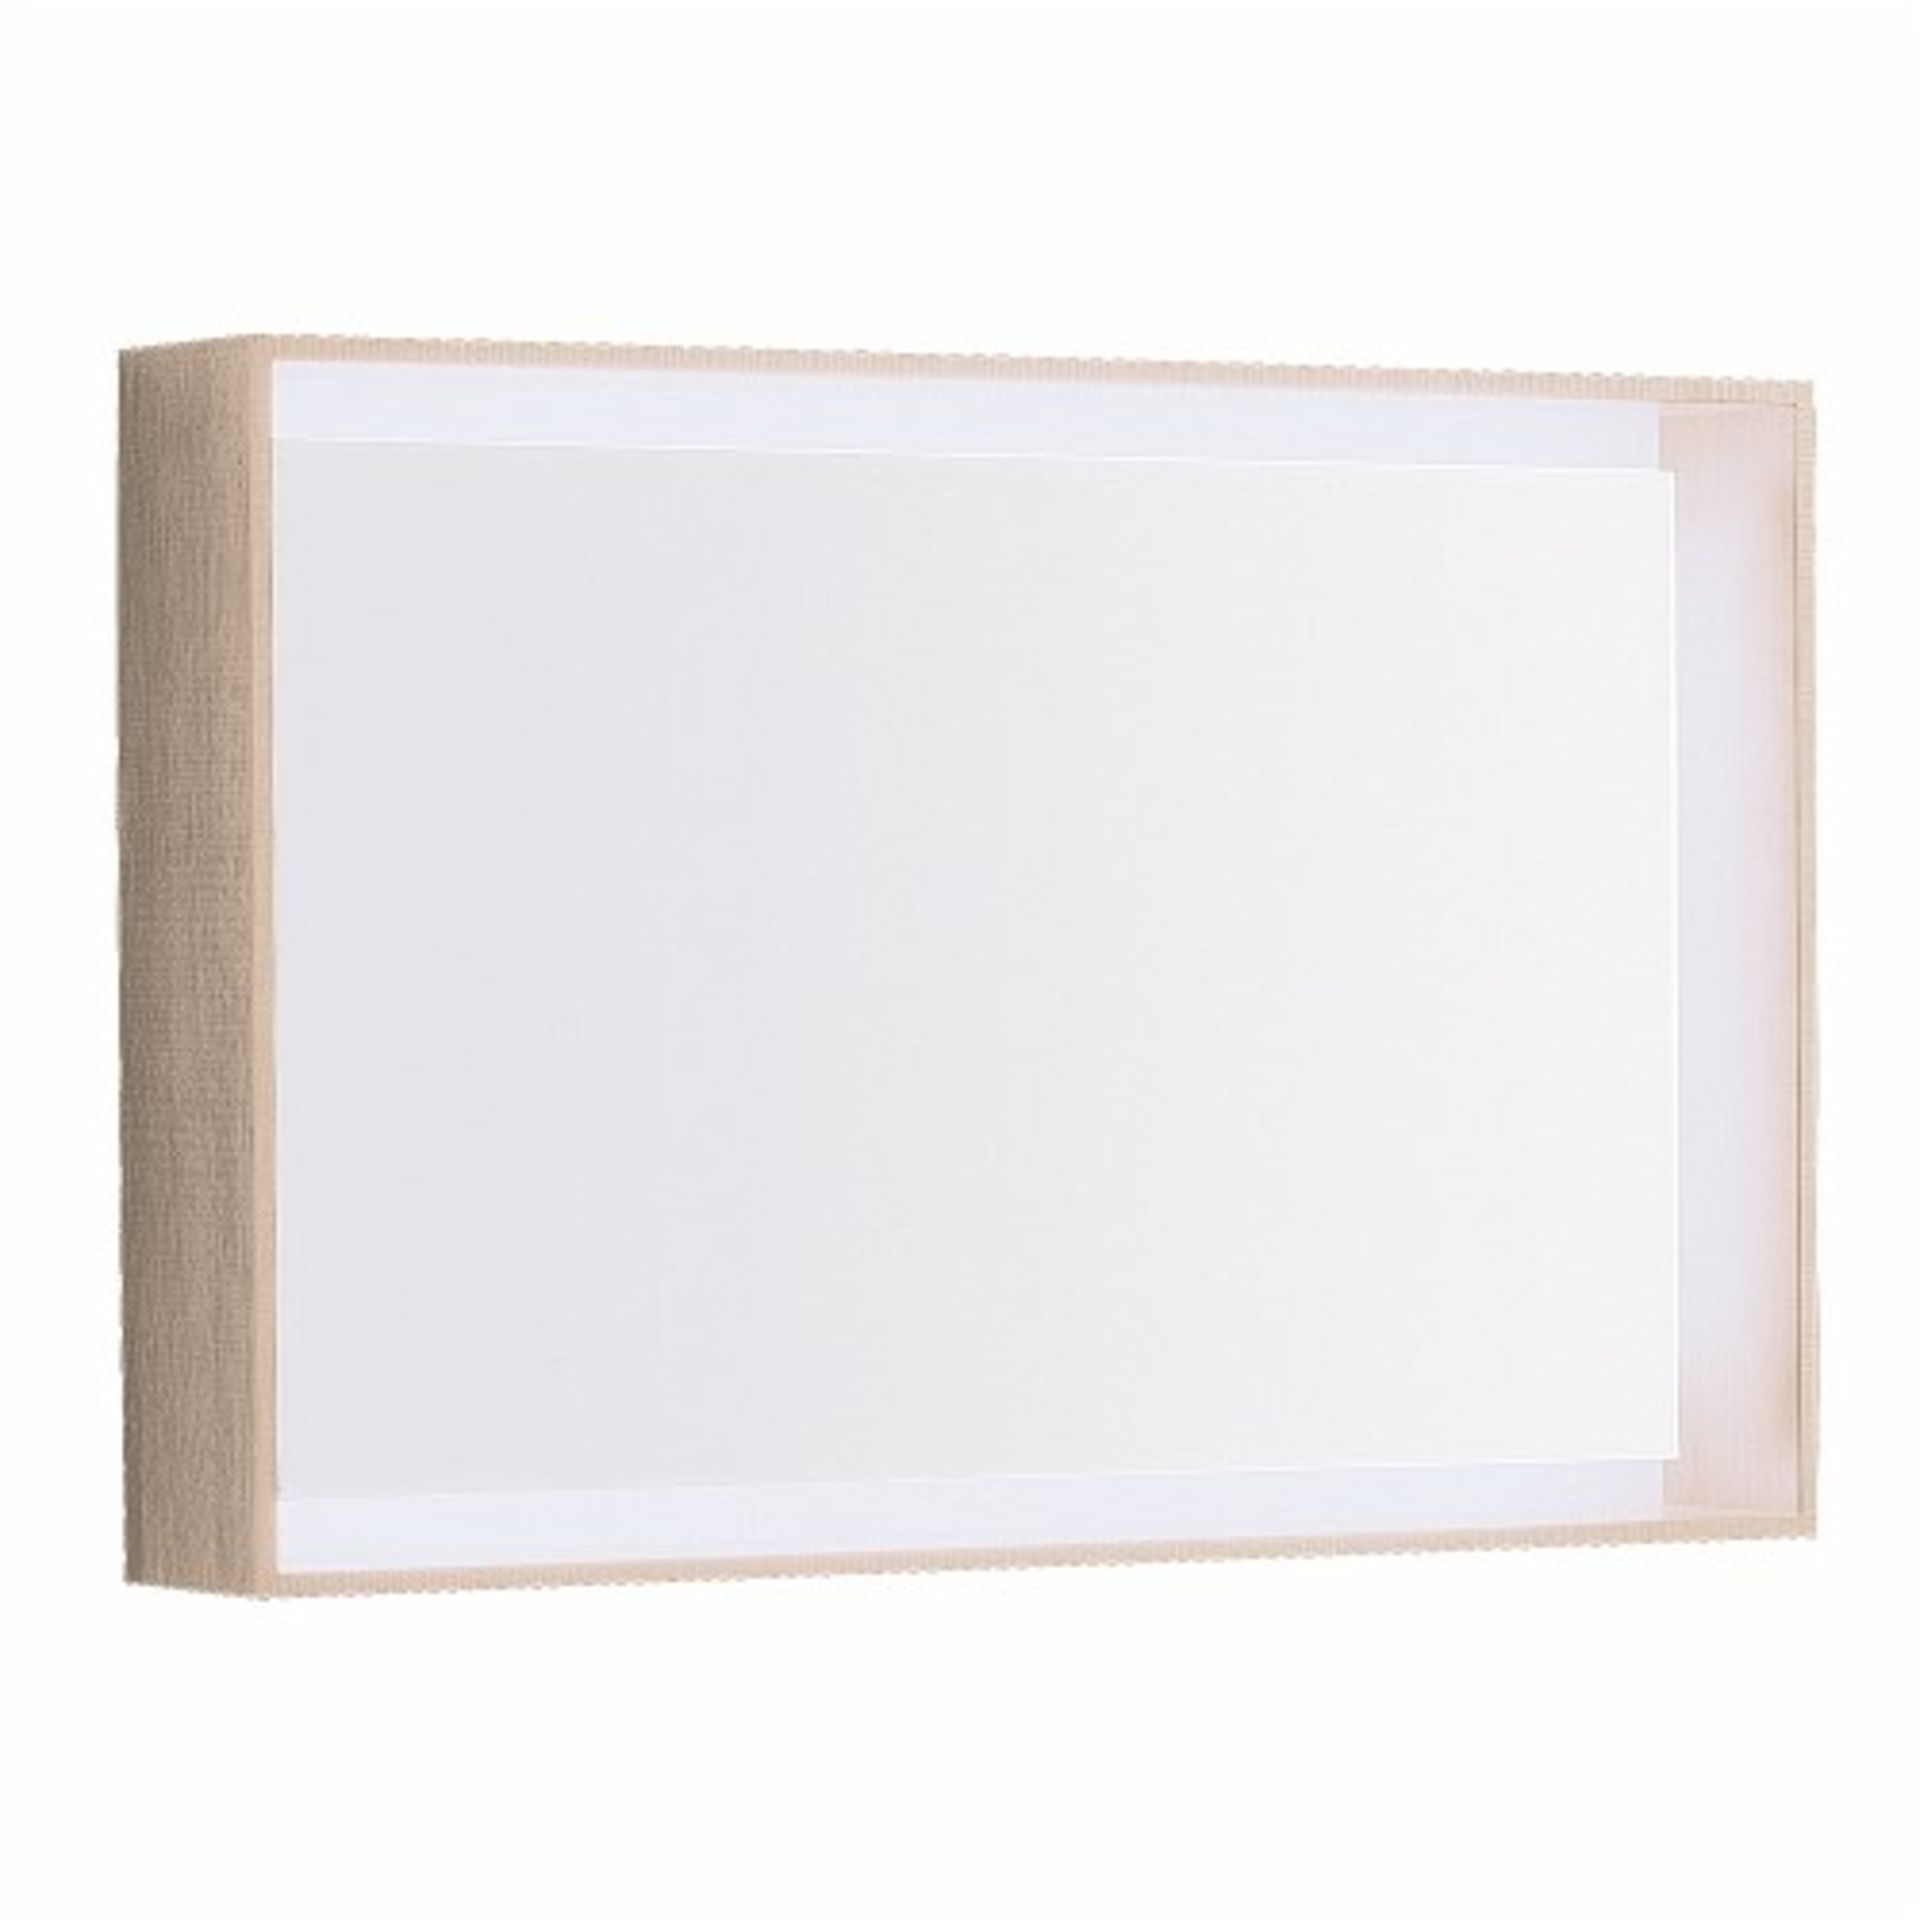 Brand New (VD20) Keramag Citterio Natural Beige illuminated Mirror.RRP £687.99.If youre looking for - Image 3 of 4